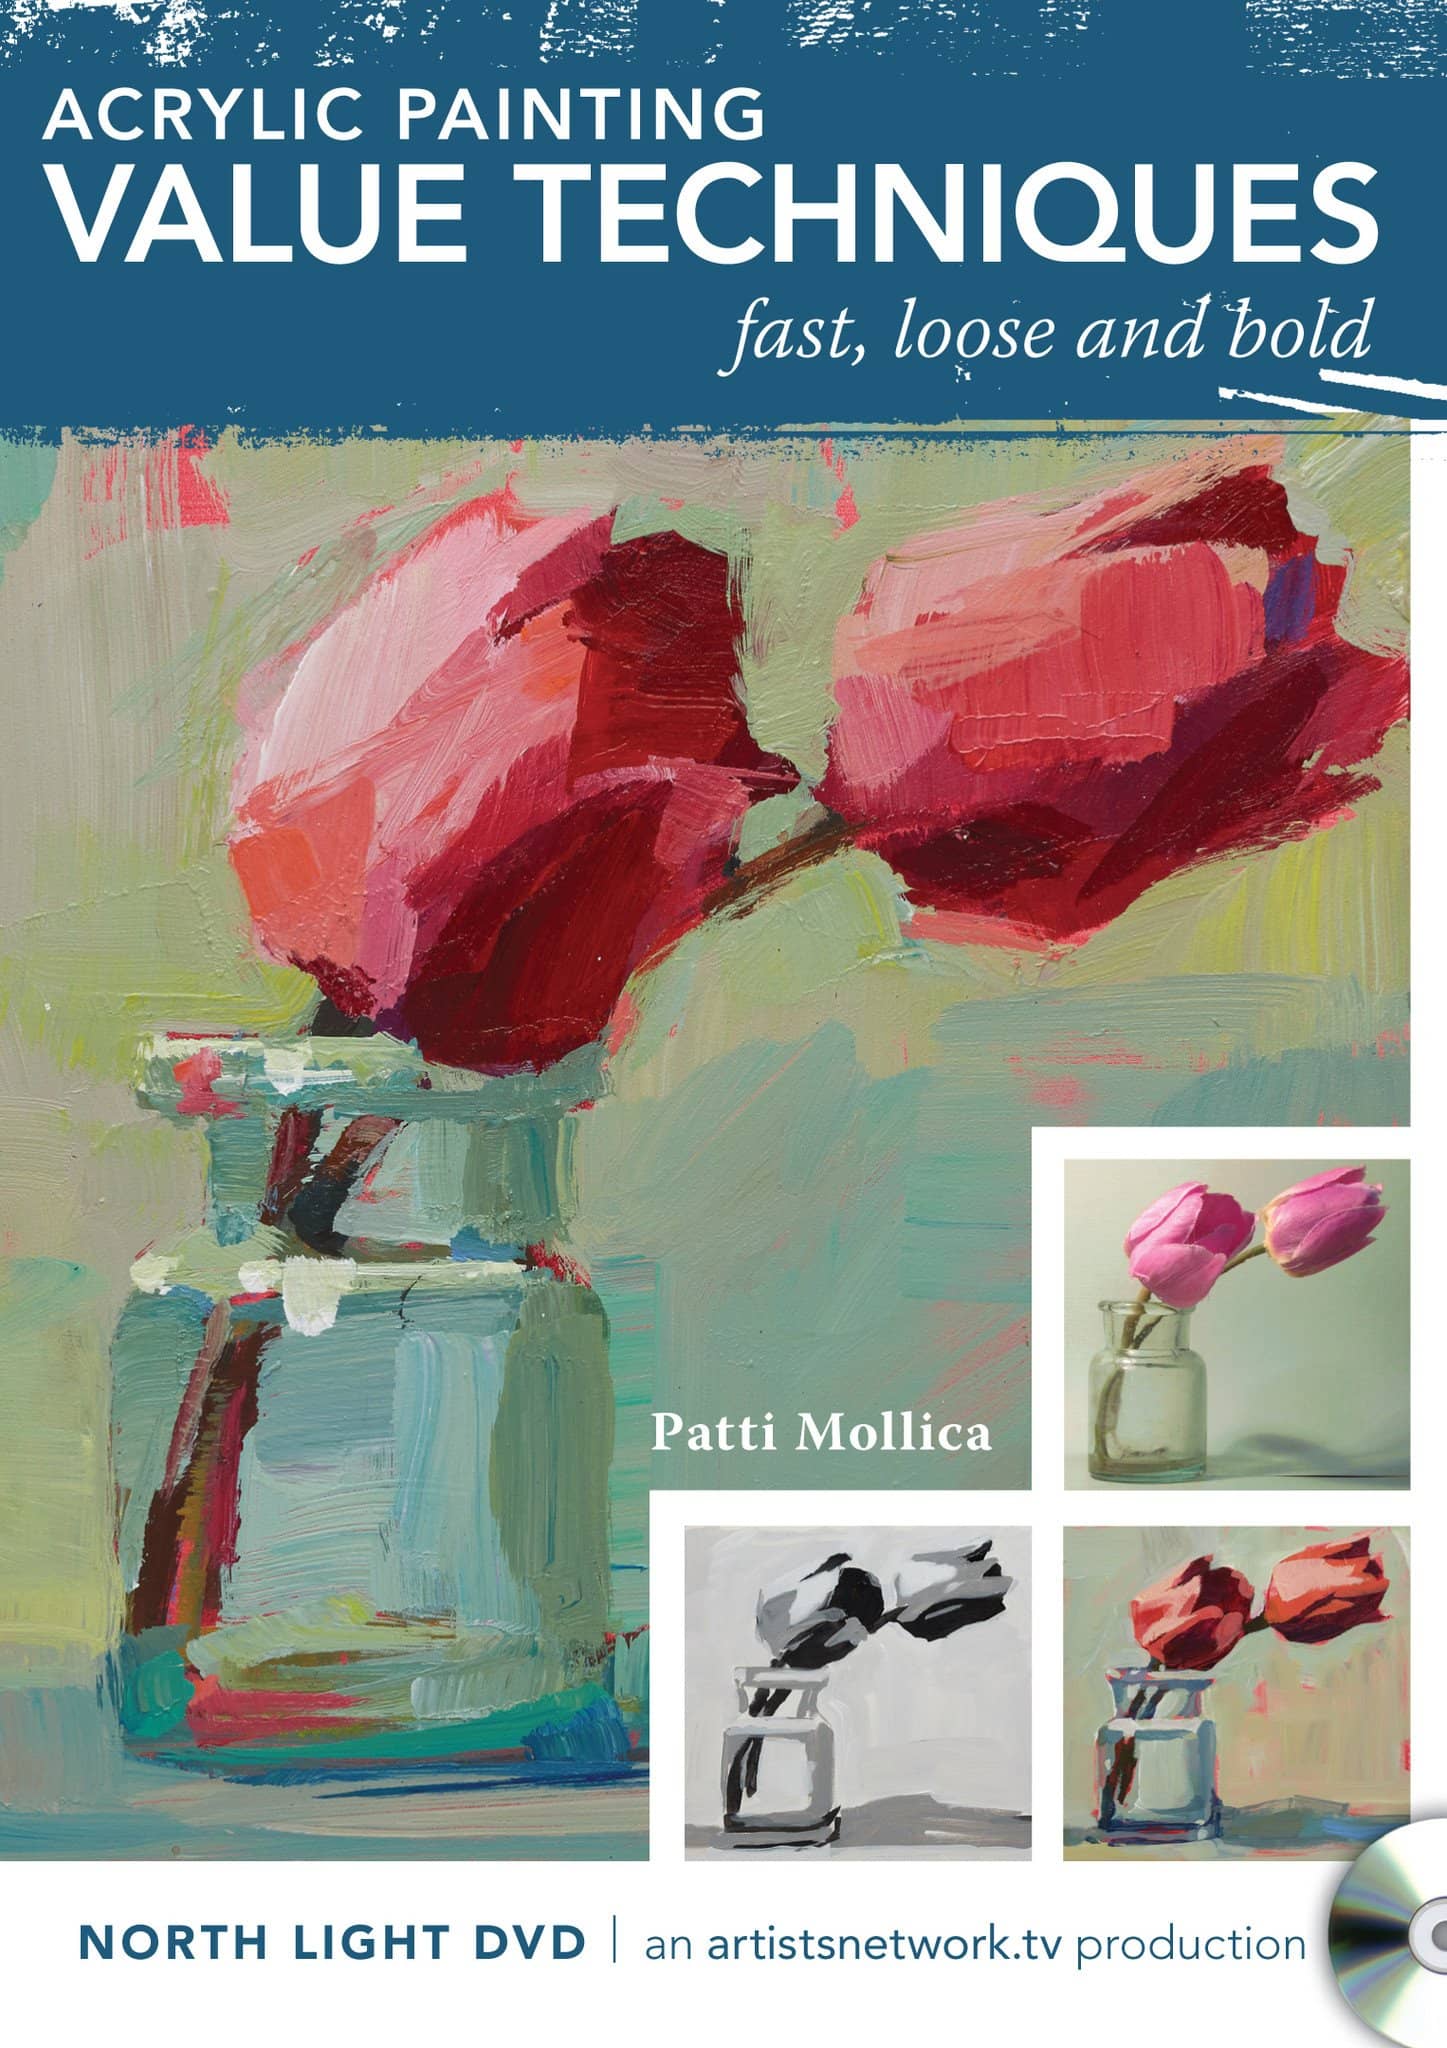 Acrylic Painting: Fast and Easy Techniques for Painting Your Favorite  Subjects and More (Paperback)